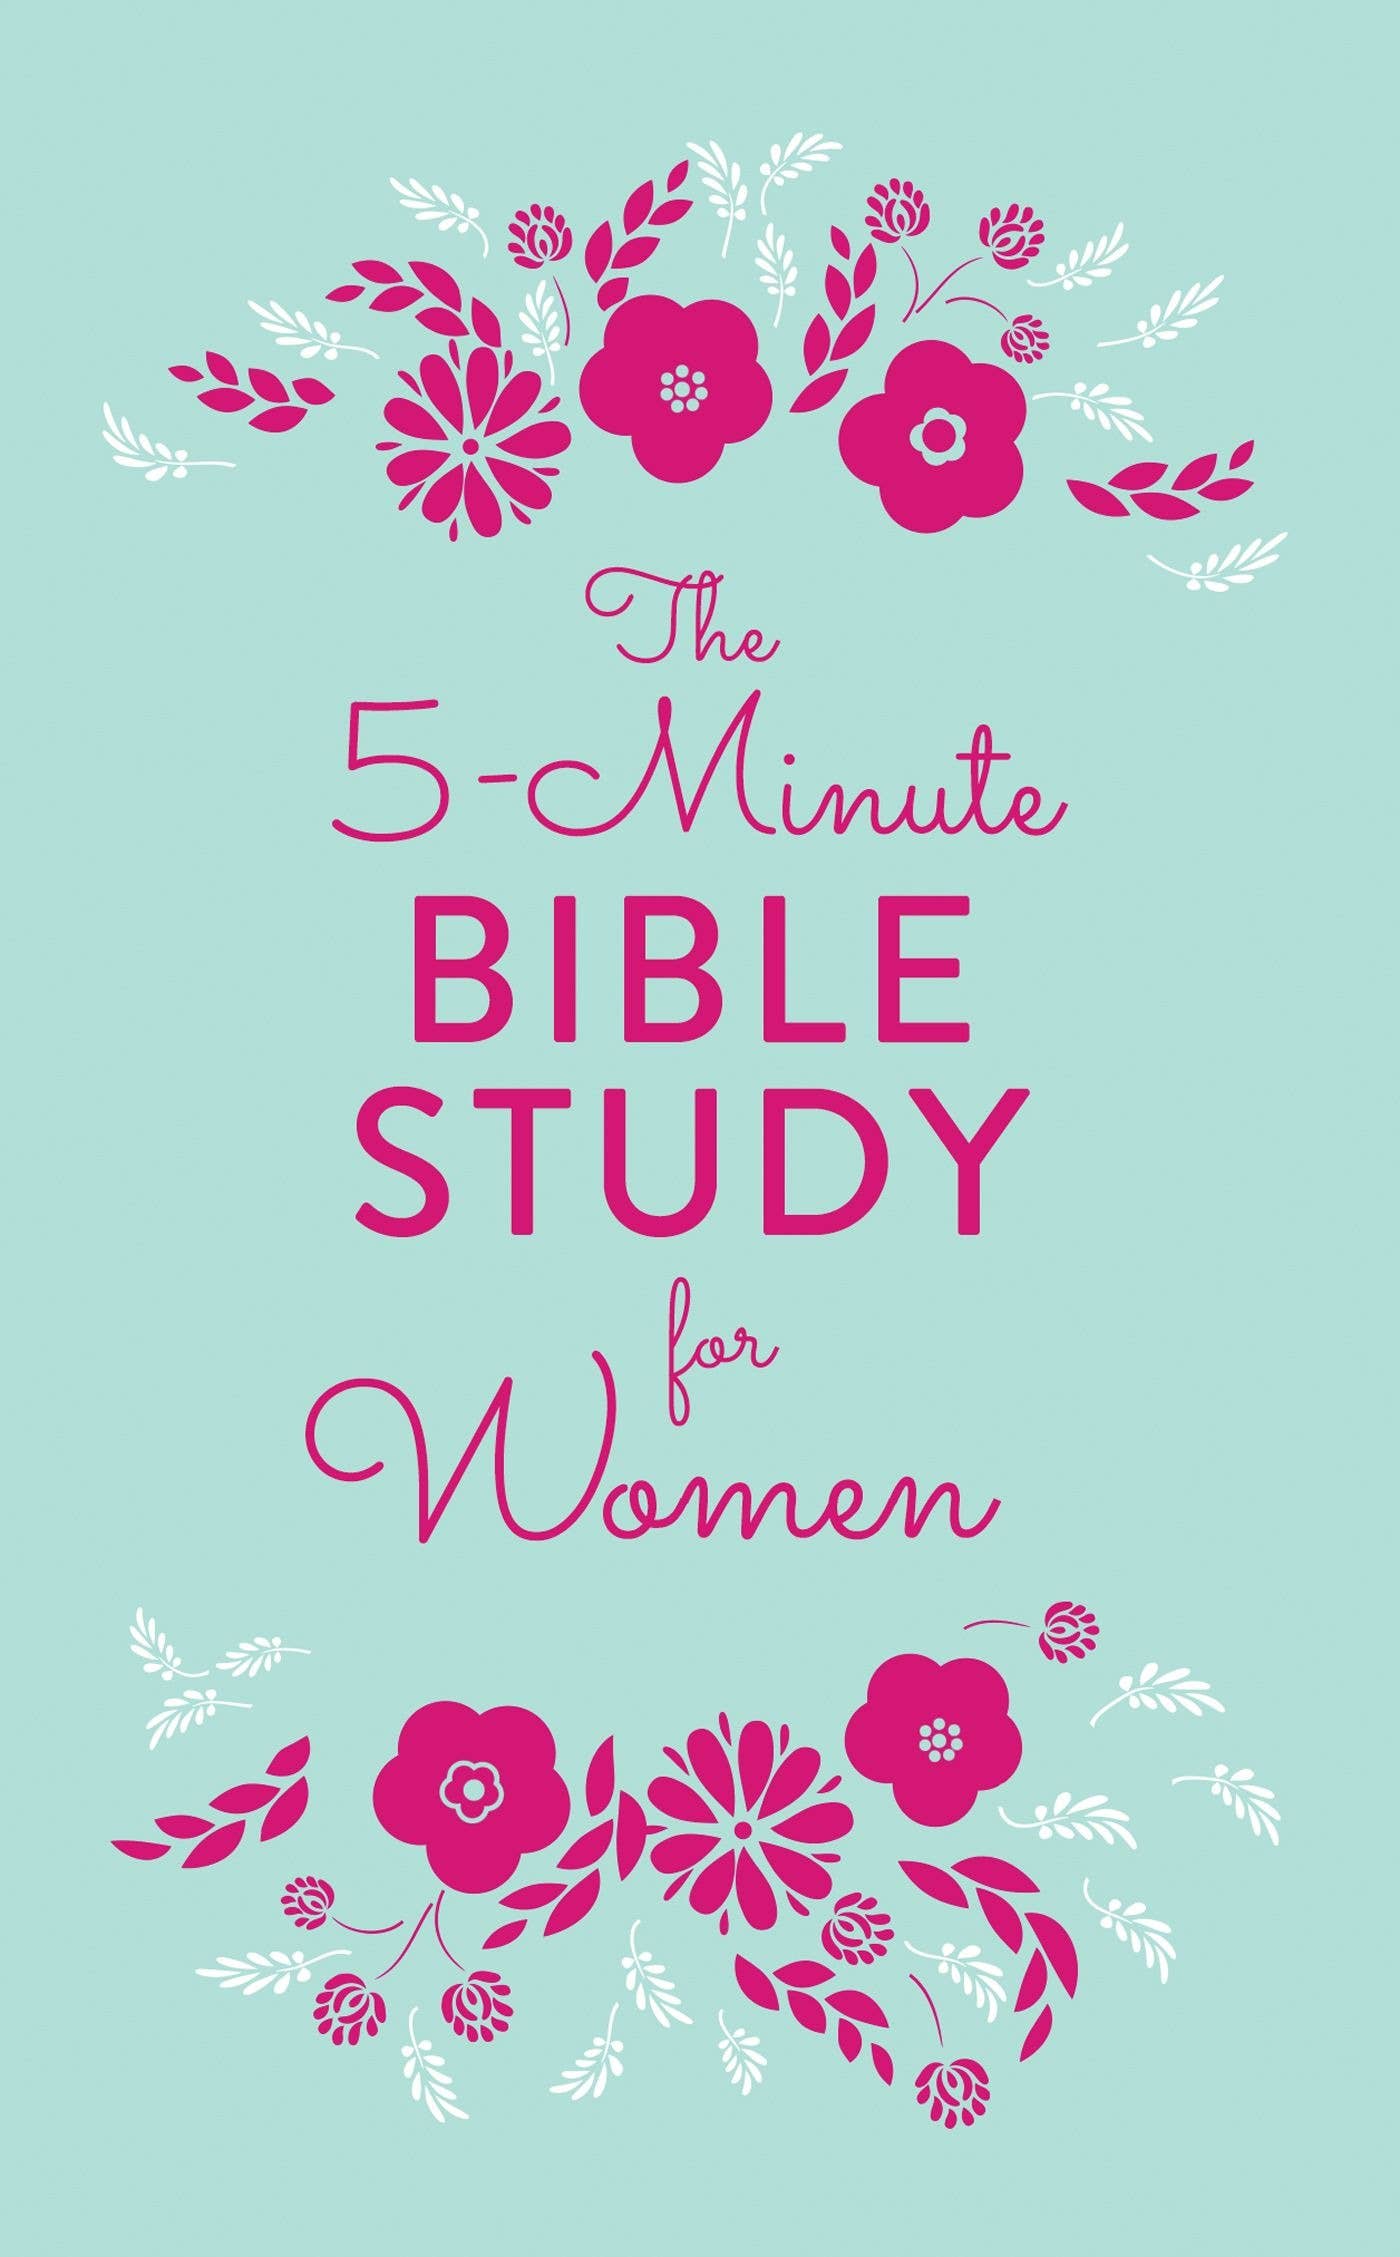 The 5-Minute Bible Study For Women Core Barbour Publishing, Inc.